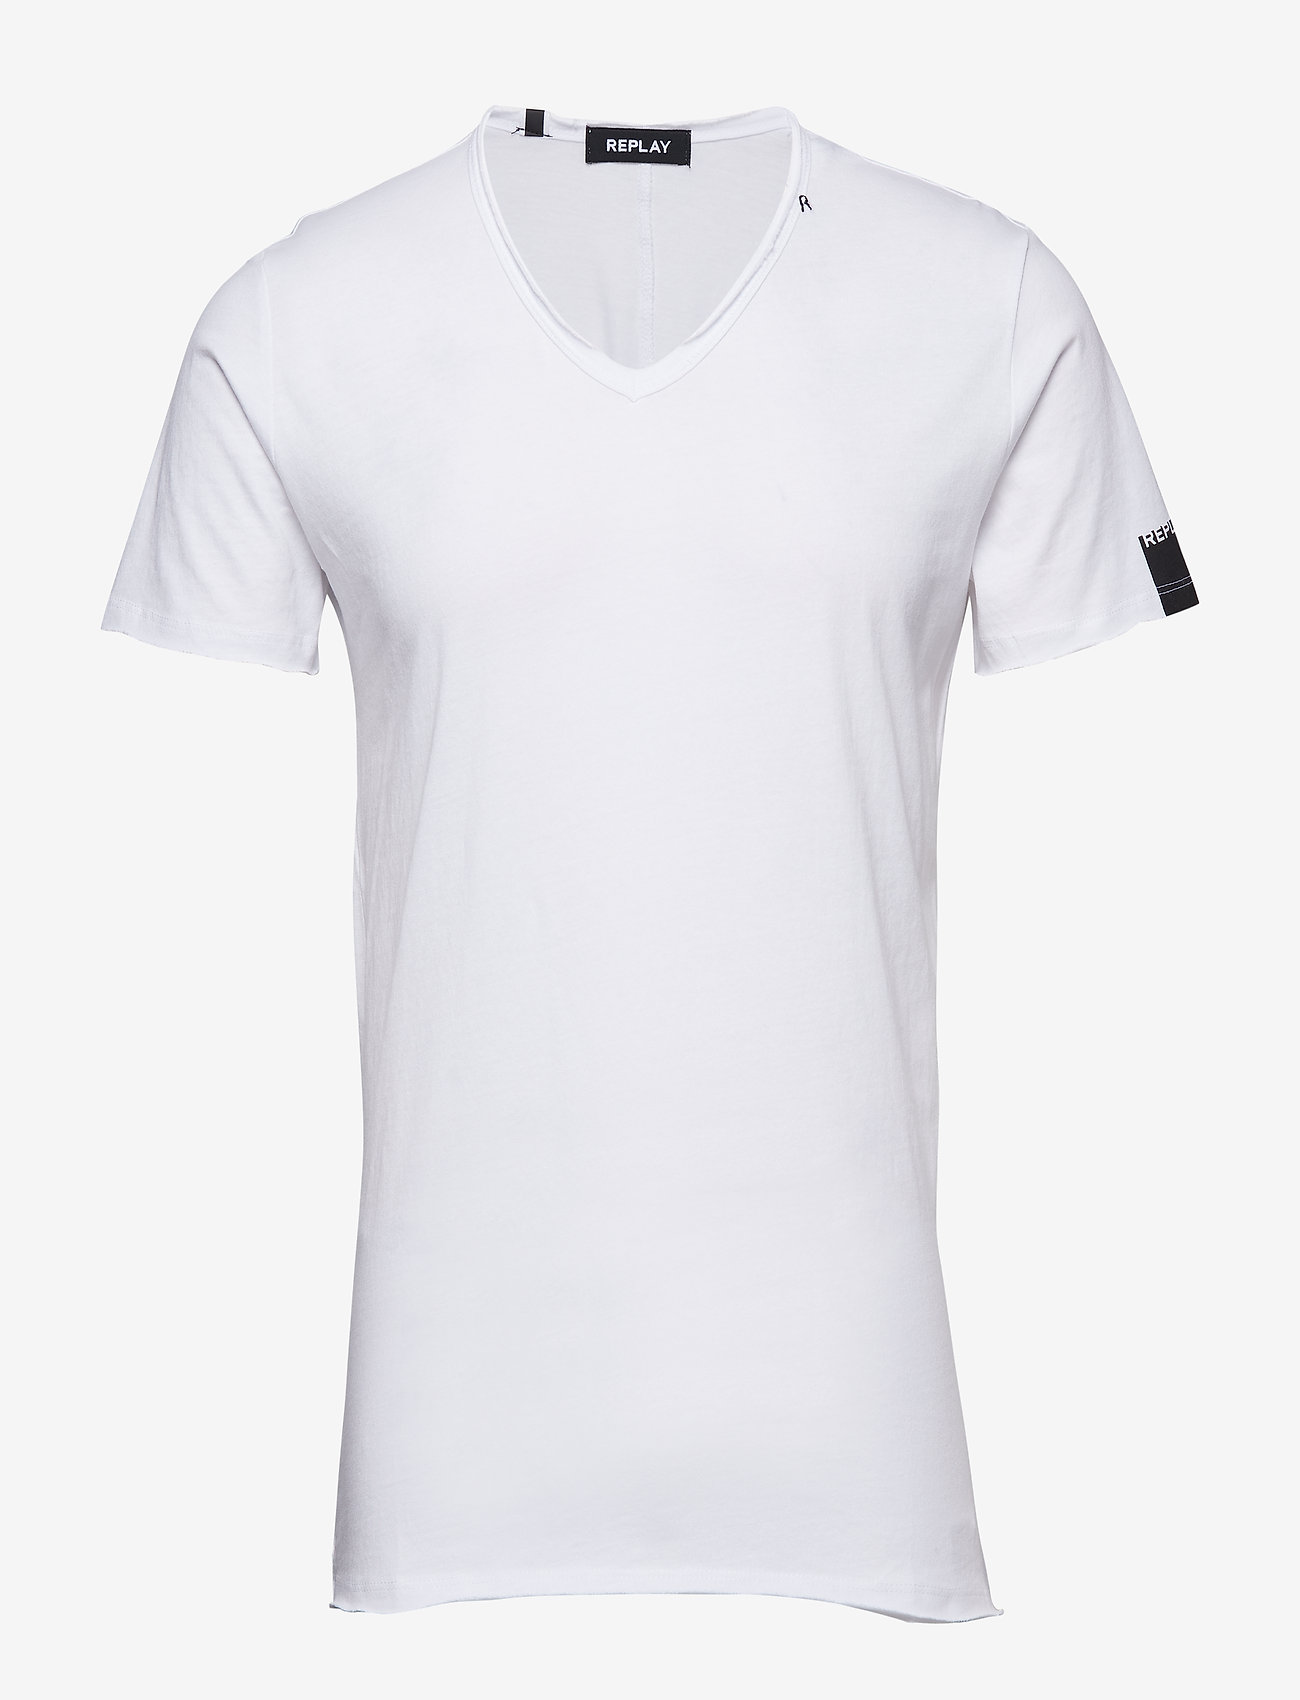 Replay - T-Shirt - lowest prices - white - 0